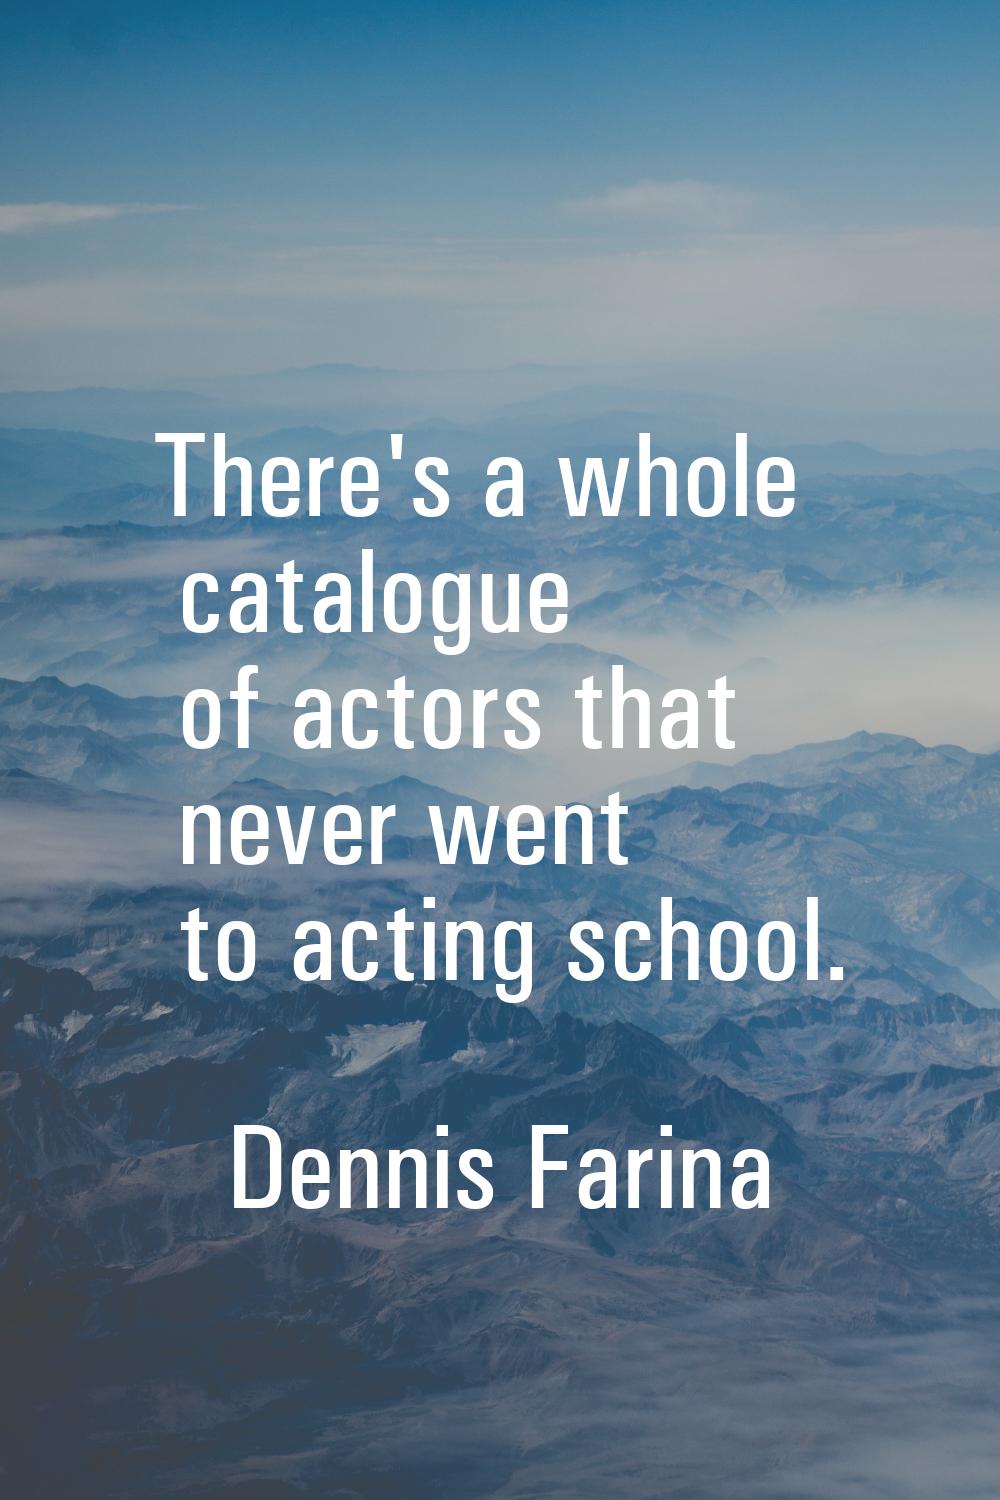 There's a whole catalogue of actors that never went to acting school.